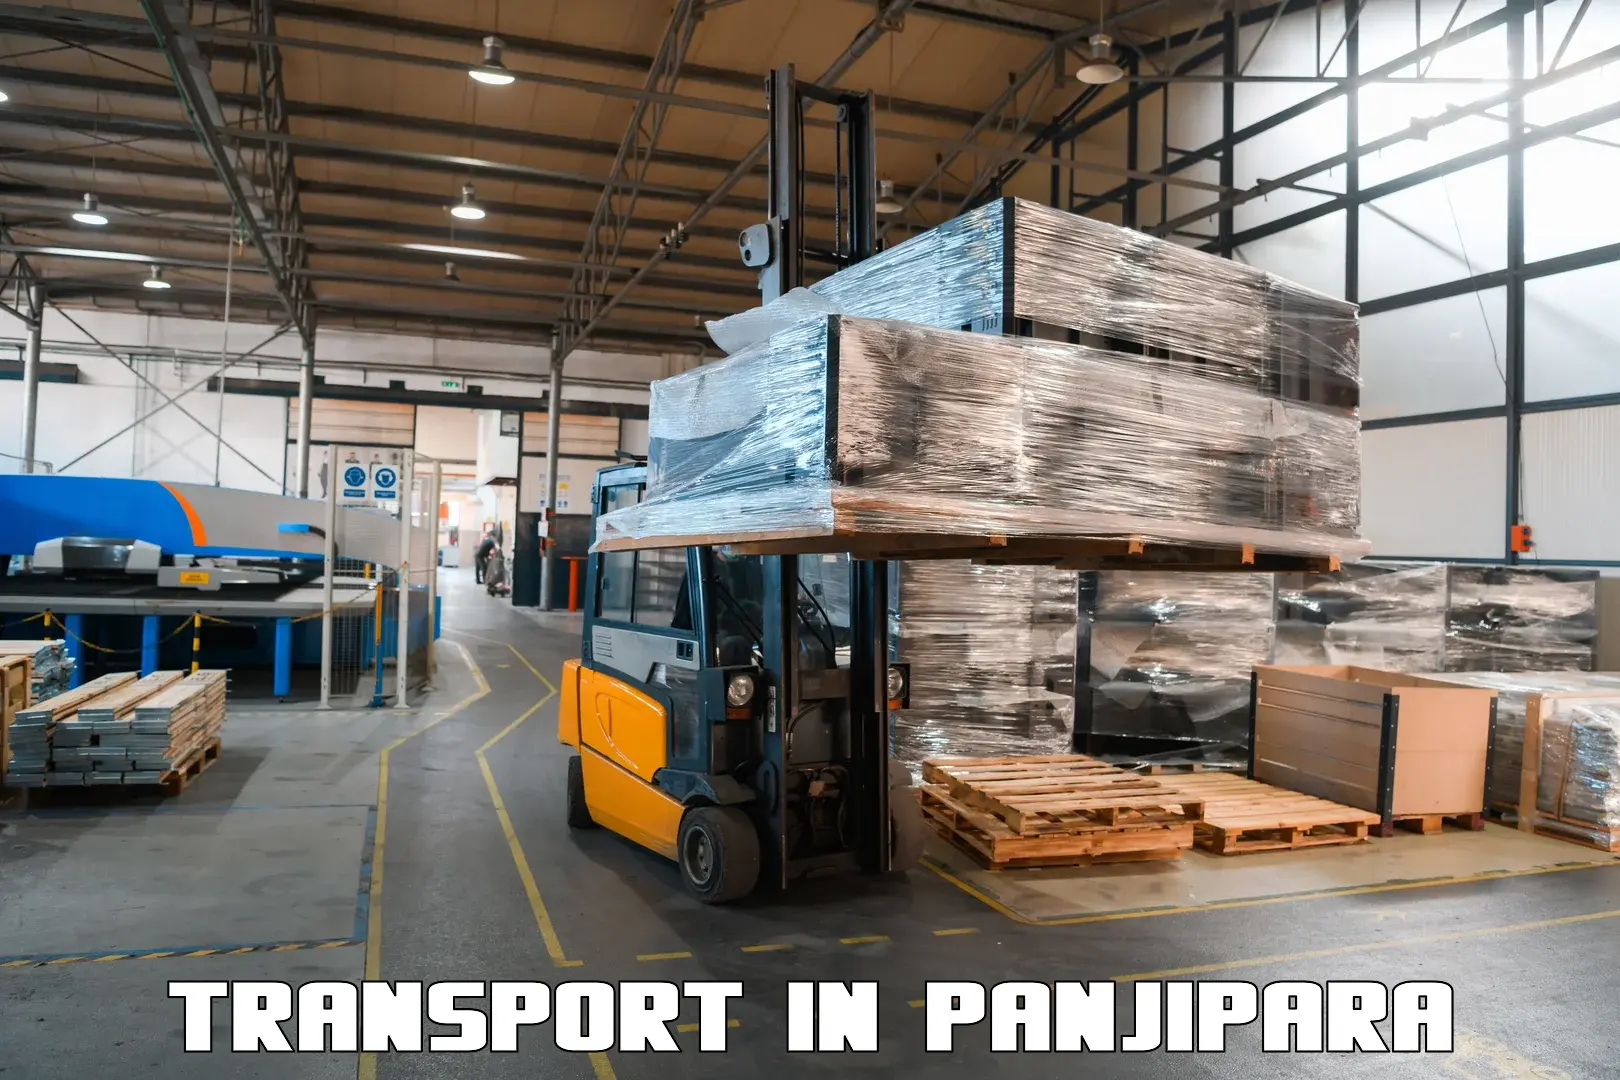 Container transportation services in Panjipara